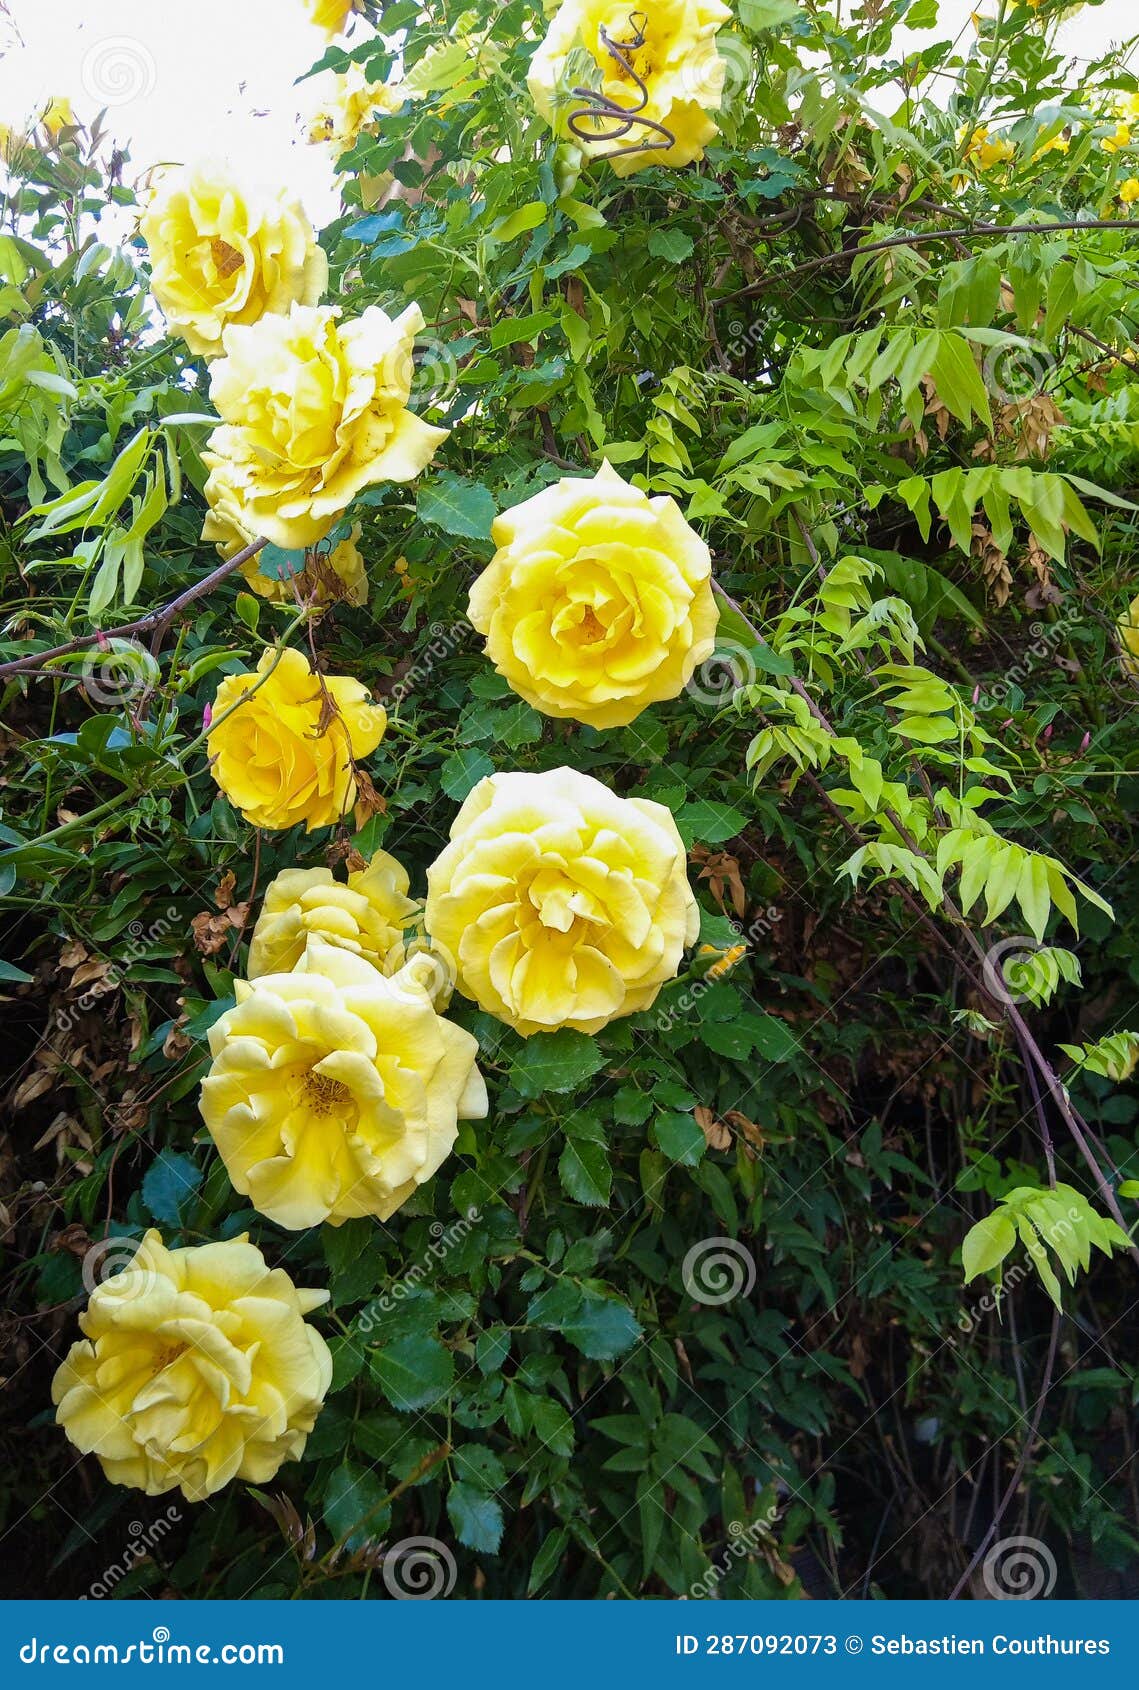 beautiful and numerous roses (rosa) of yellow color growing on a rosebush